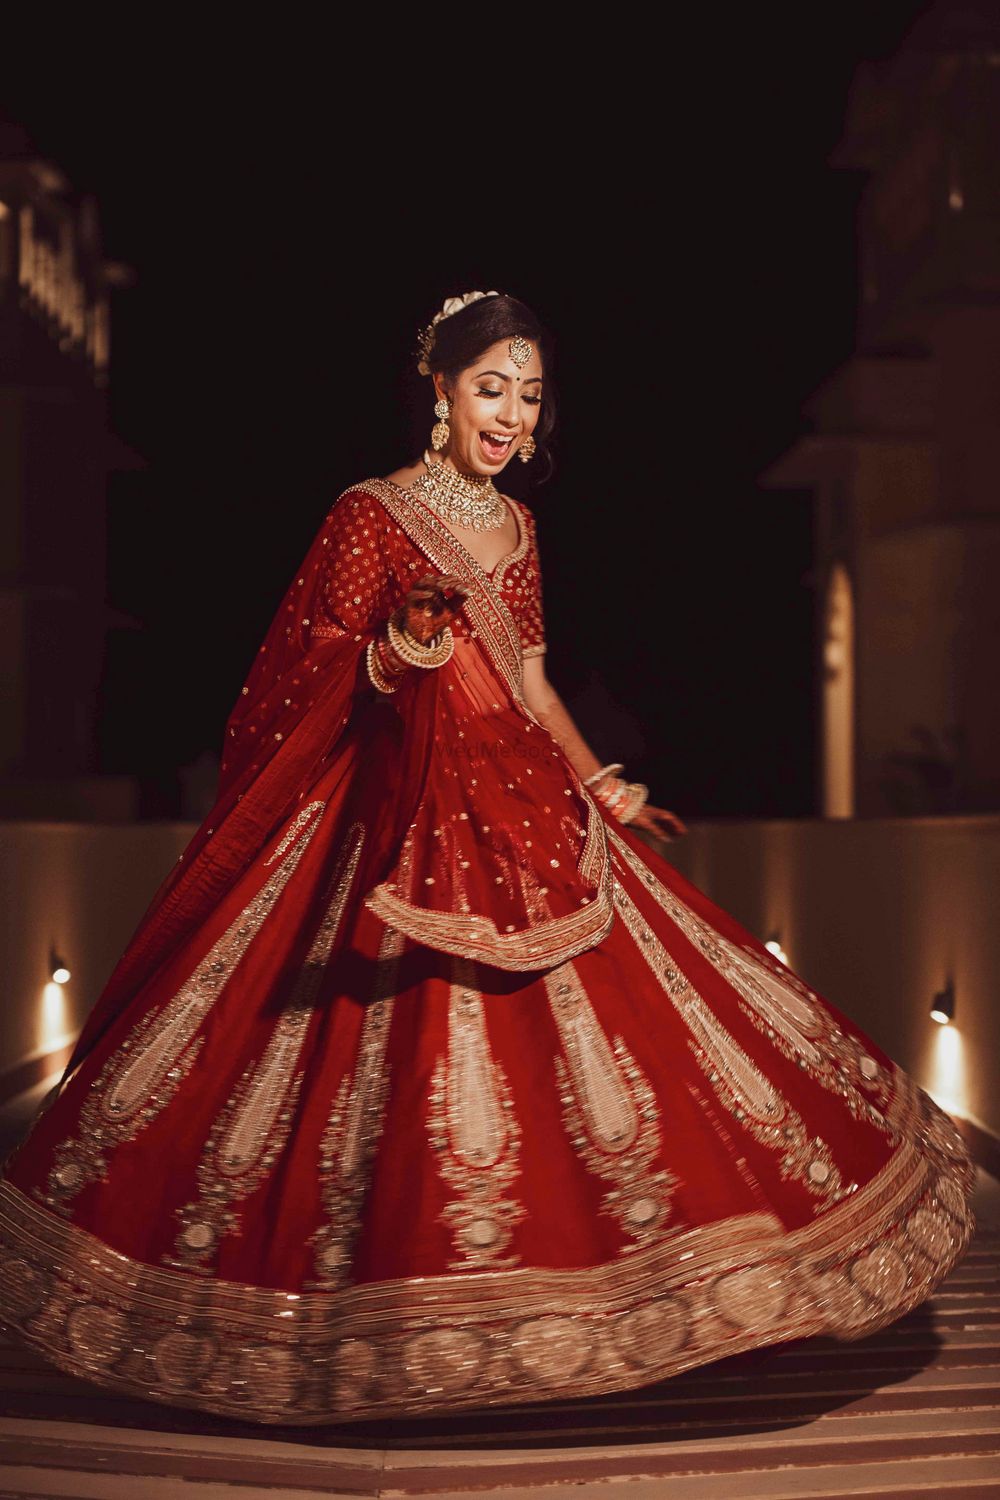 Photo of Bride twirling in red and gold simple lehenga